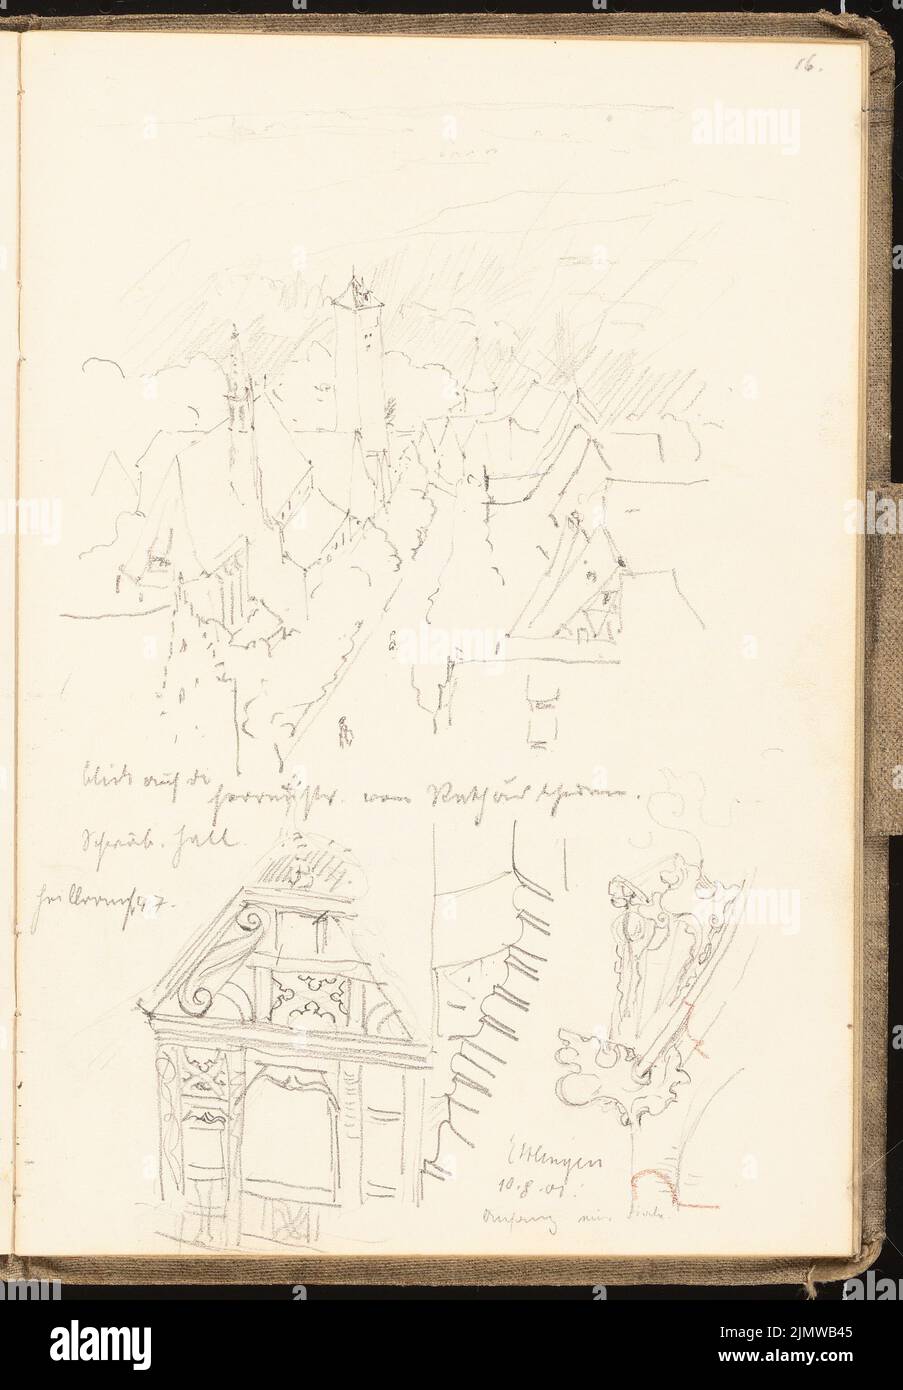 Michel Paul sen. (1877-1938), sketchbook. 1901 (10.08.1901): View of Schwäbisch Hall from the town hall tower, gable of a half -timbered house, Fiale in Esslingen. Pencil, colored pencil on paper, 24.3 x 16.9 cm (including scan edges) Michel Paul sen.  (1877-1938): Skizzenbuch. 1901 Stock Photo